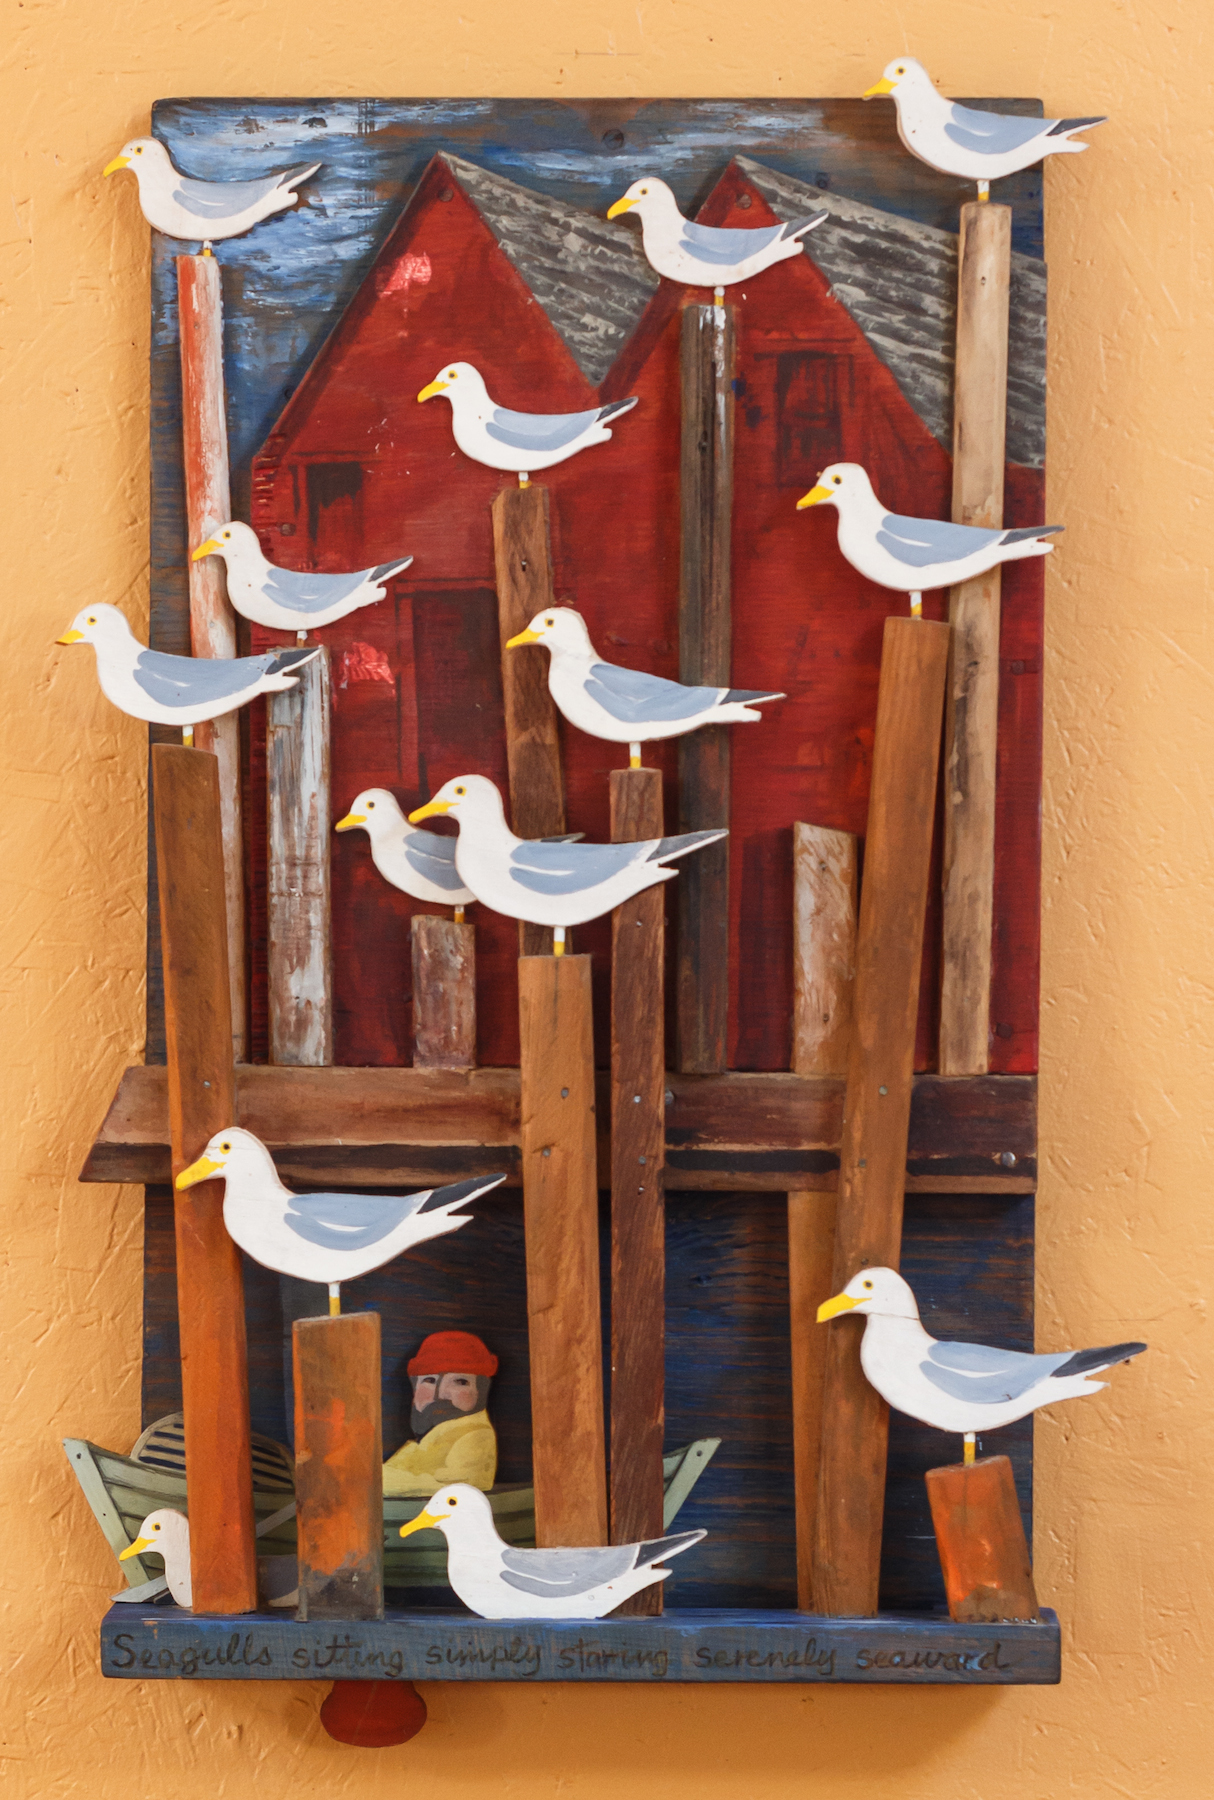 seagulls-by-john-hooper-made-as-a-birthday-gift-for-his-daughter-2